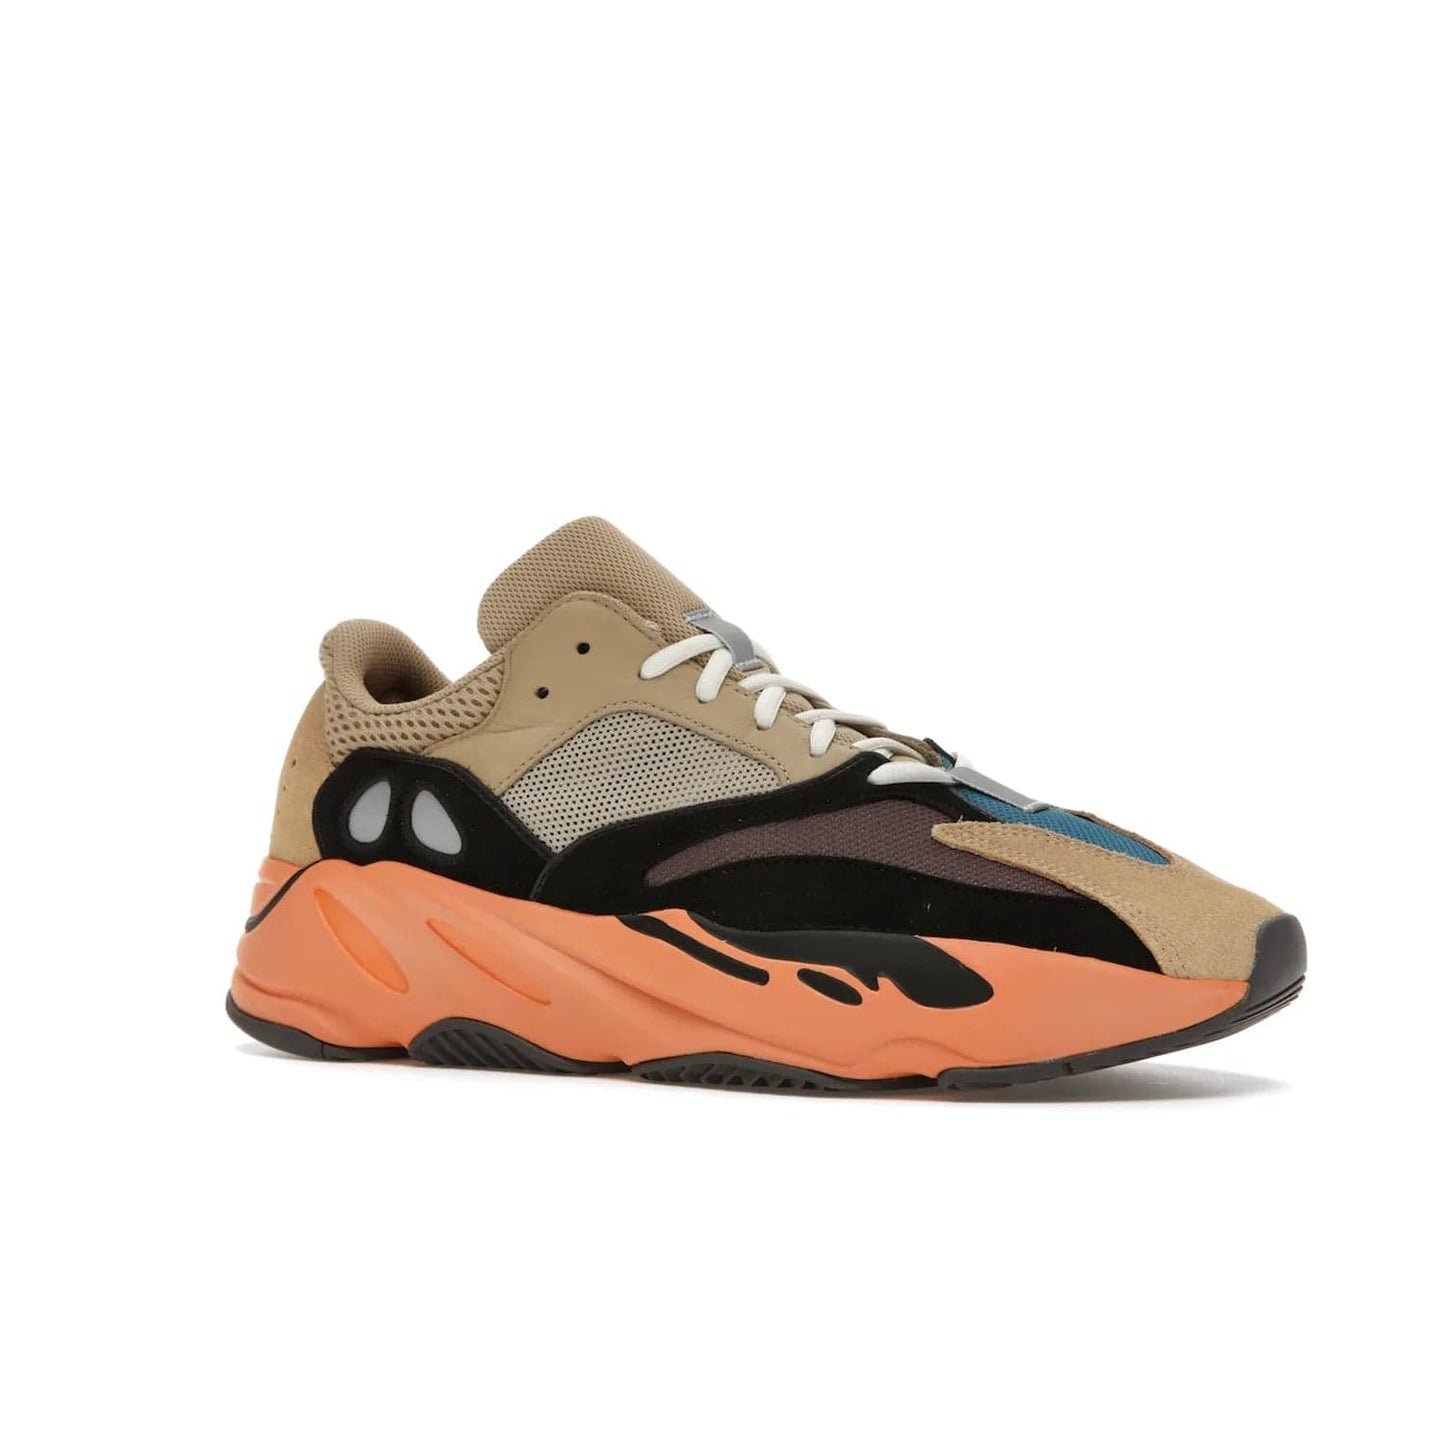 adidas Yeezy Boost 700 Enflame Amber - Image 4 - Only at www.BallersClubKickz.com - Adidas Yeezy Boost 700 Enflame Amber: Eye-catching design with pale yellow, brown, teal, and orange! Get yours in June 2021.